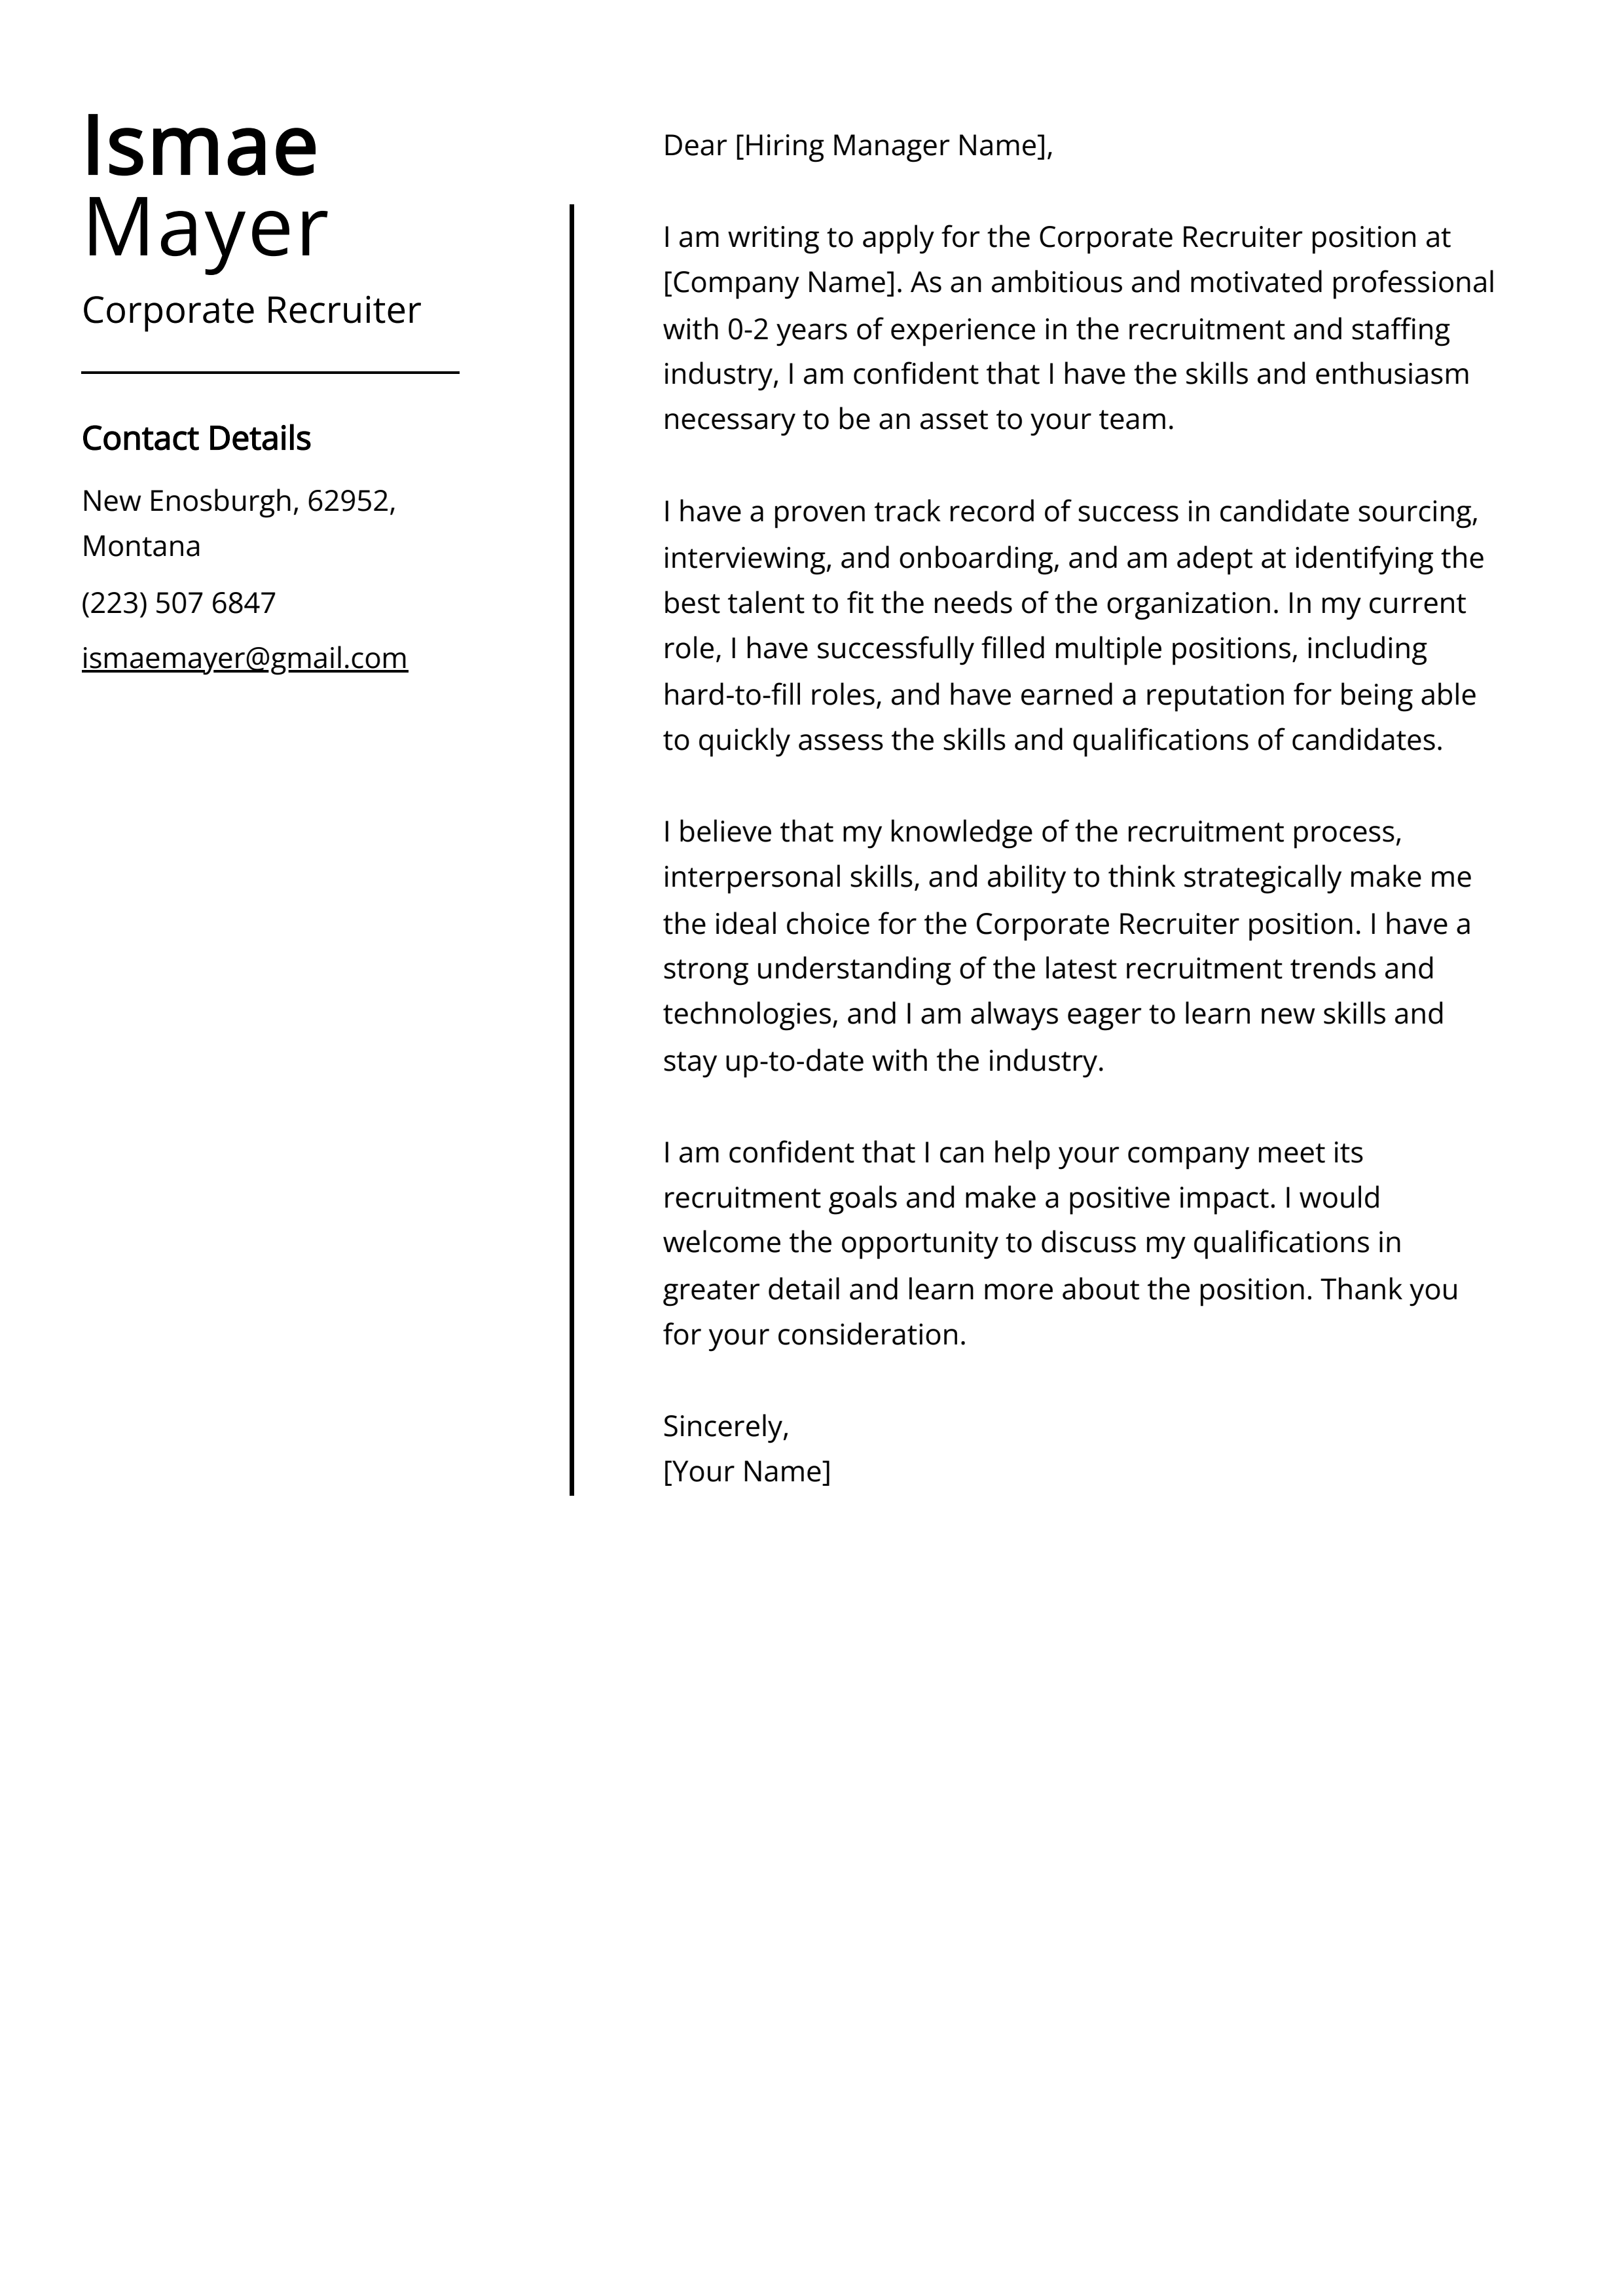 Corporate Recruiter Cover Letter Example